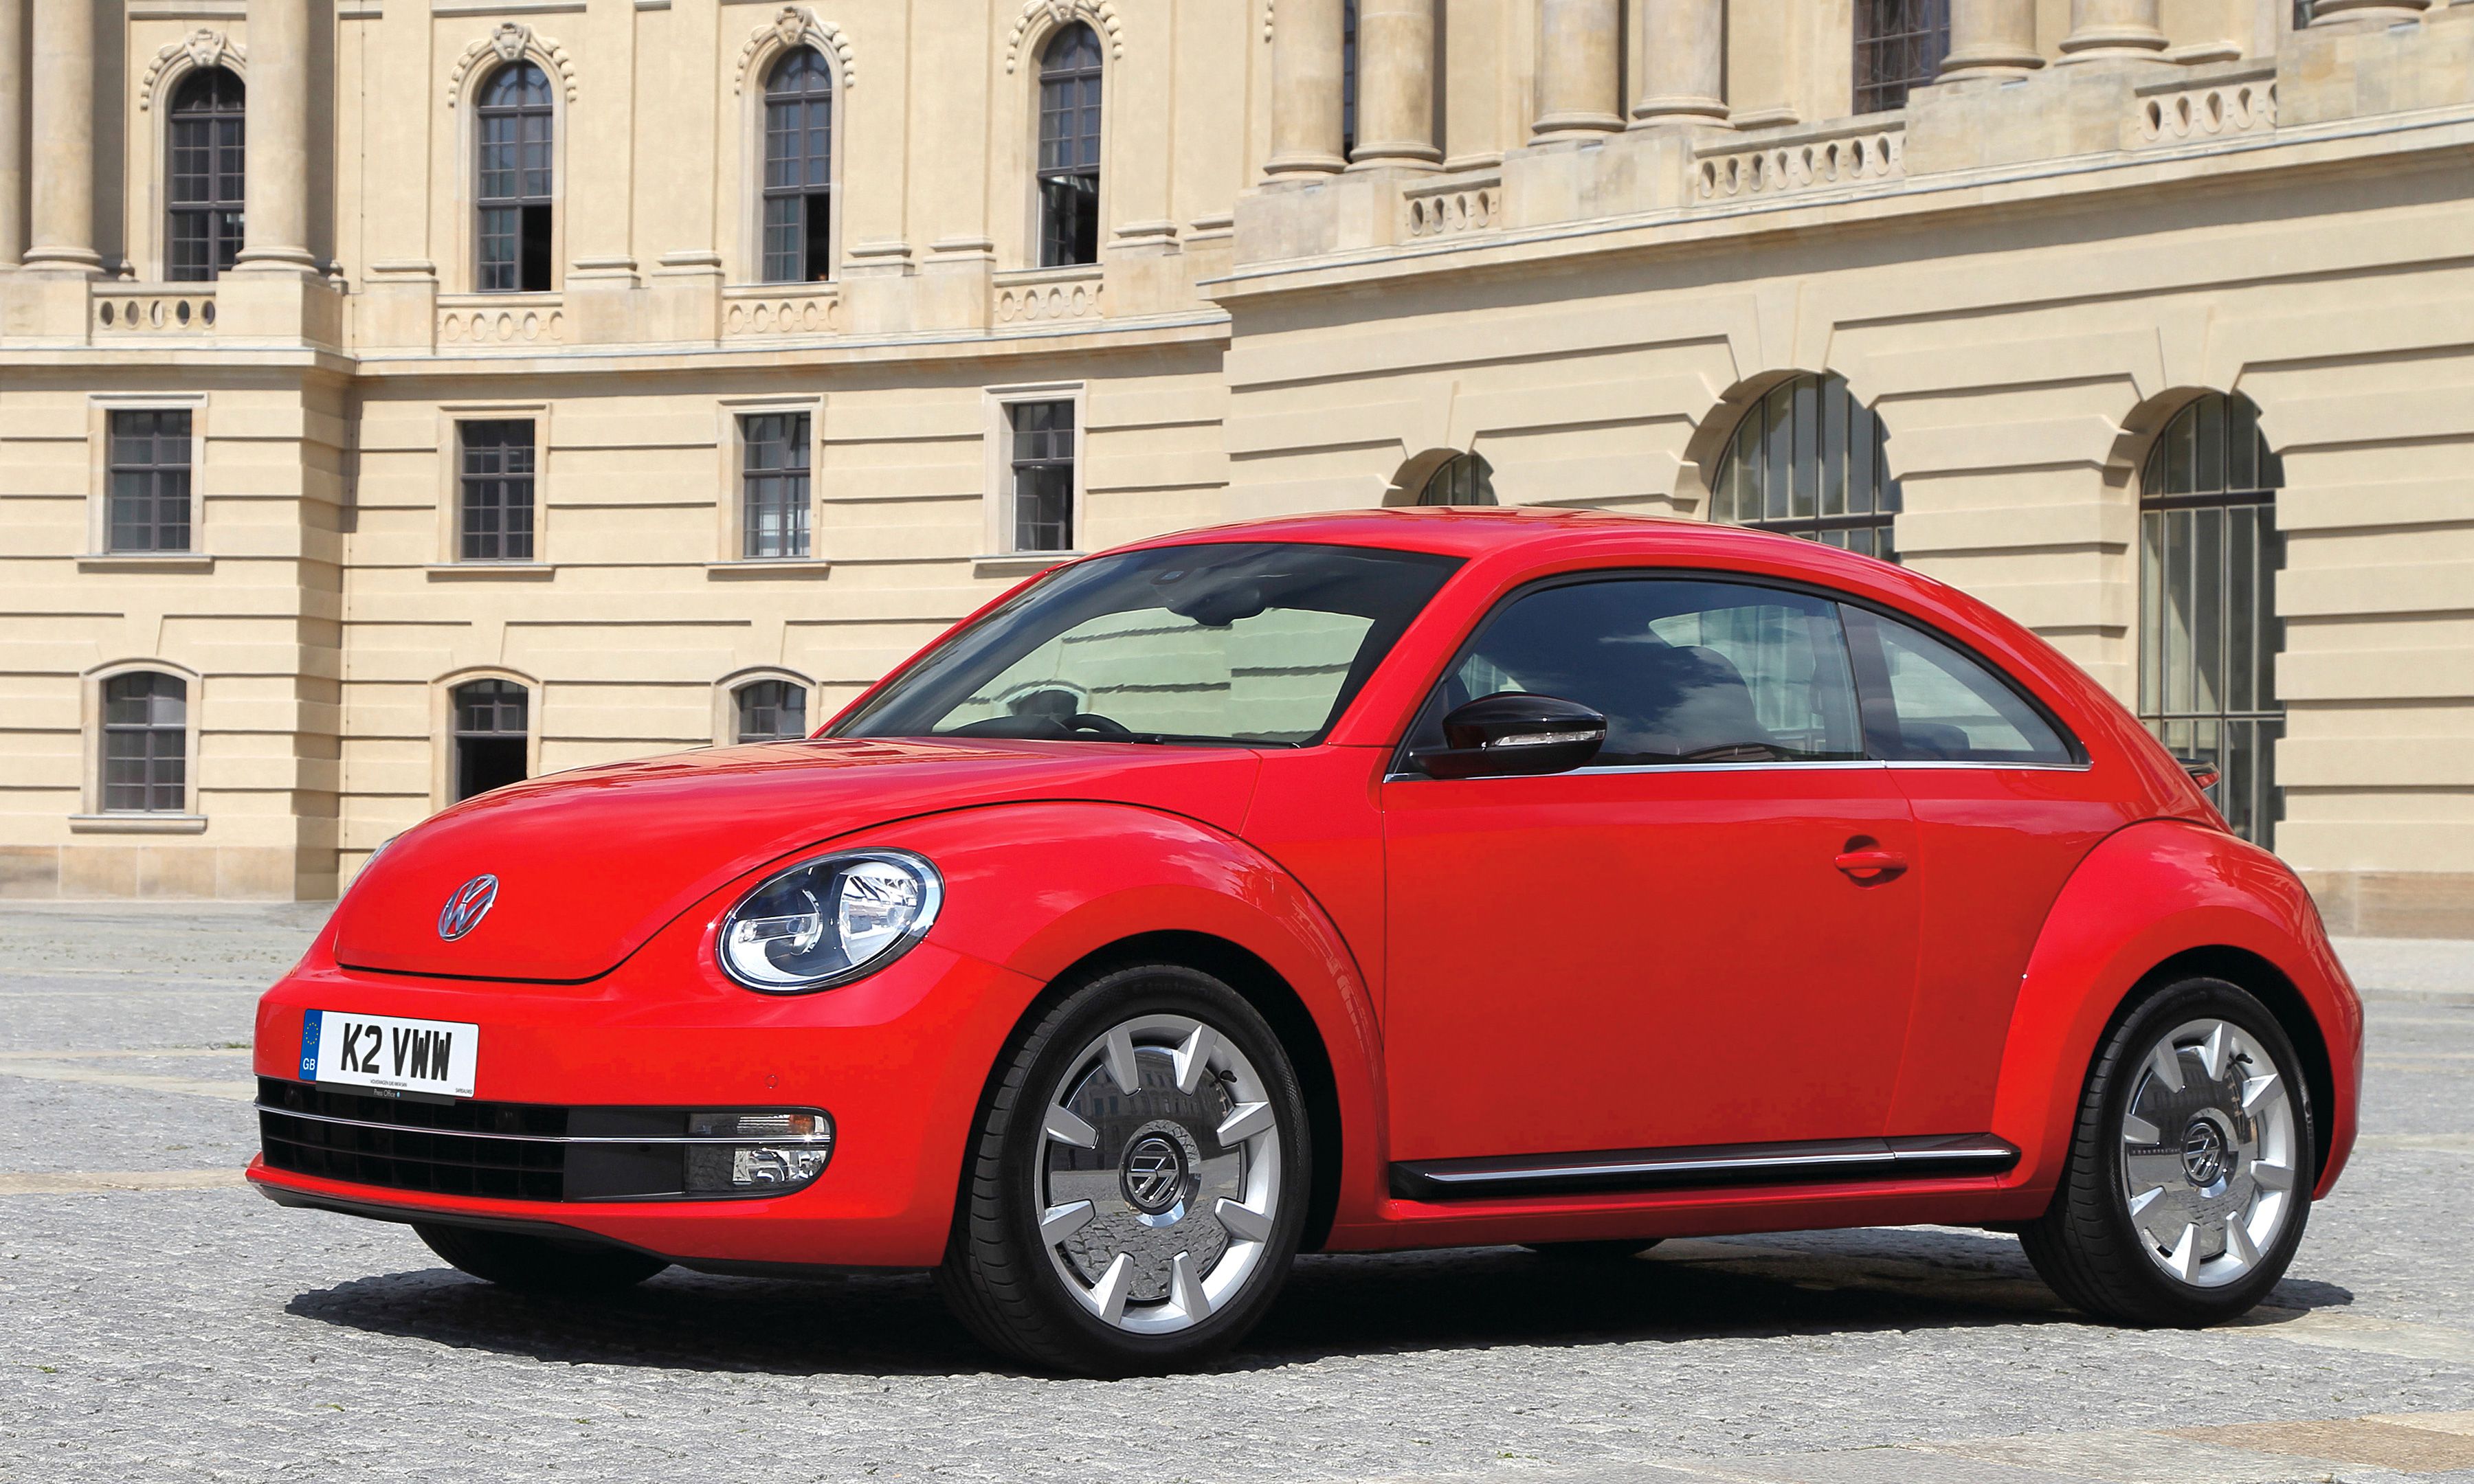 2014 Volkswagen Beetle Research Photos Specs and Expertise  CarMax